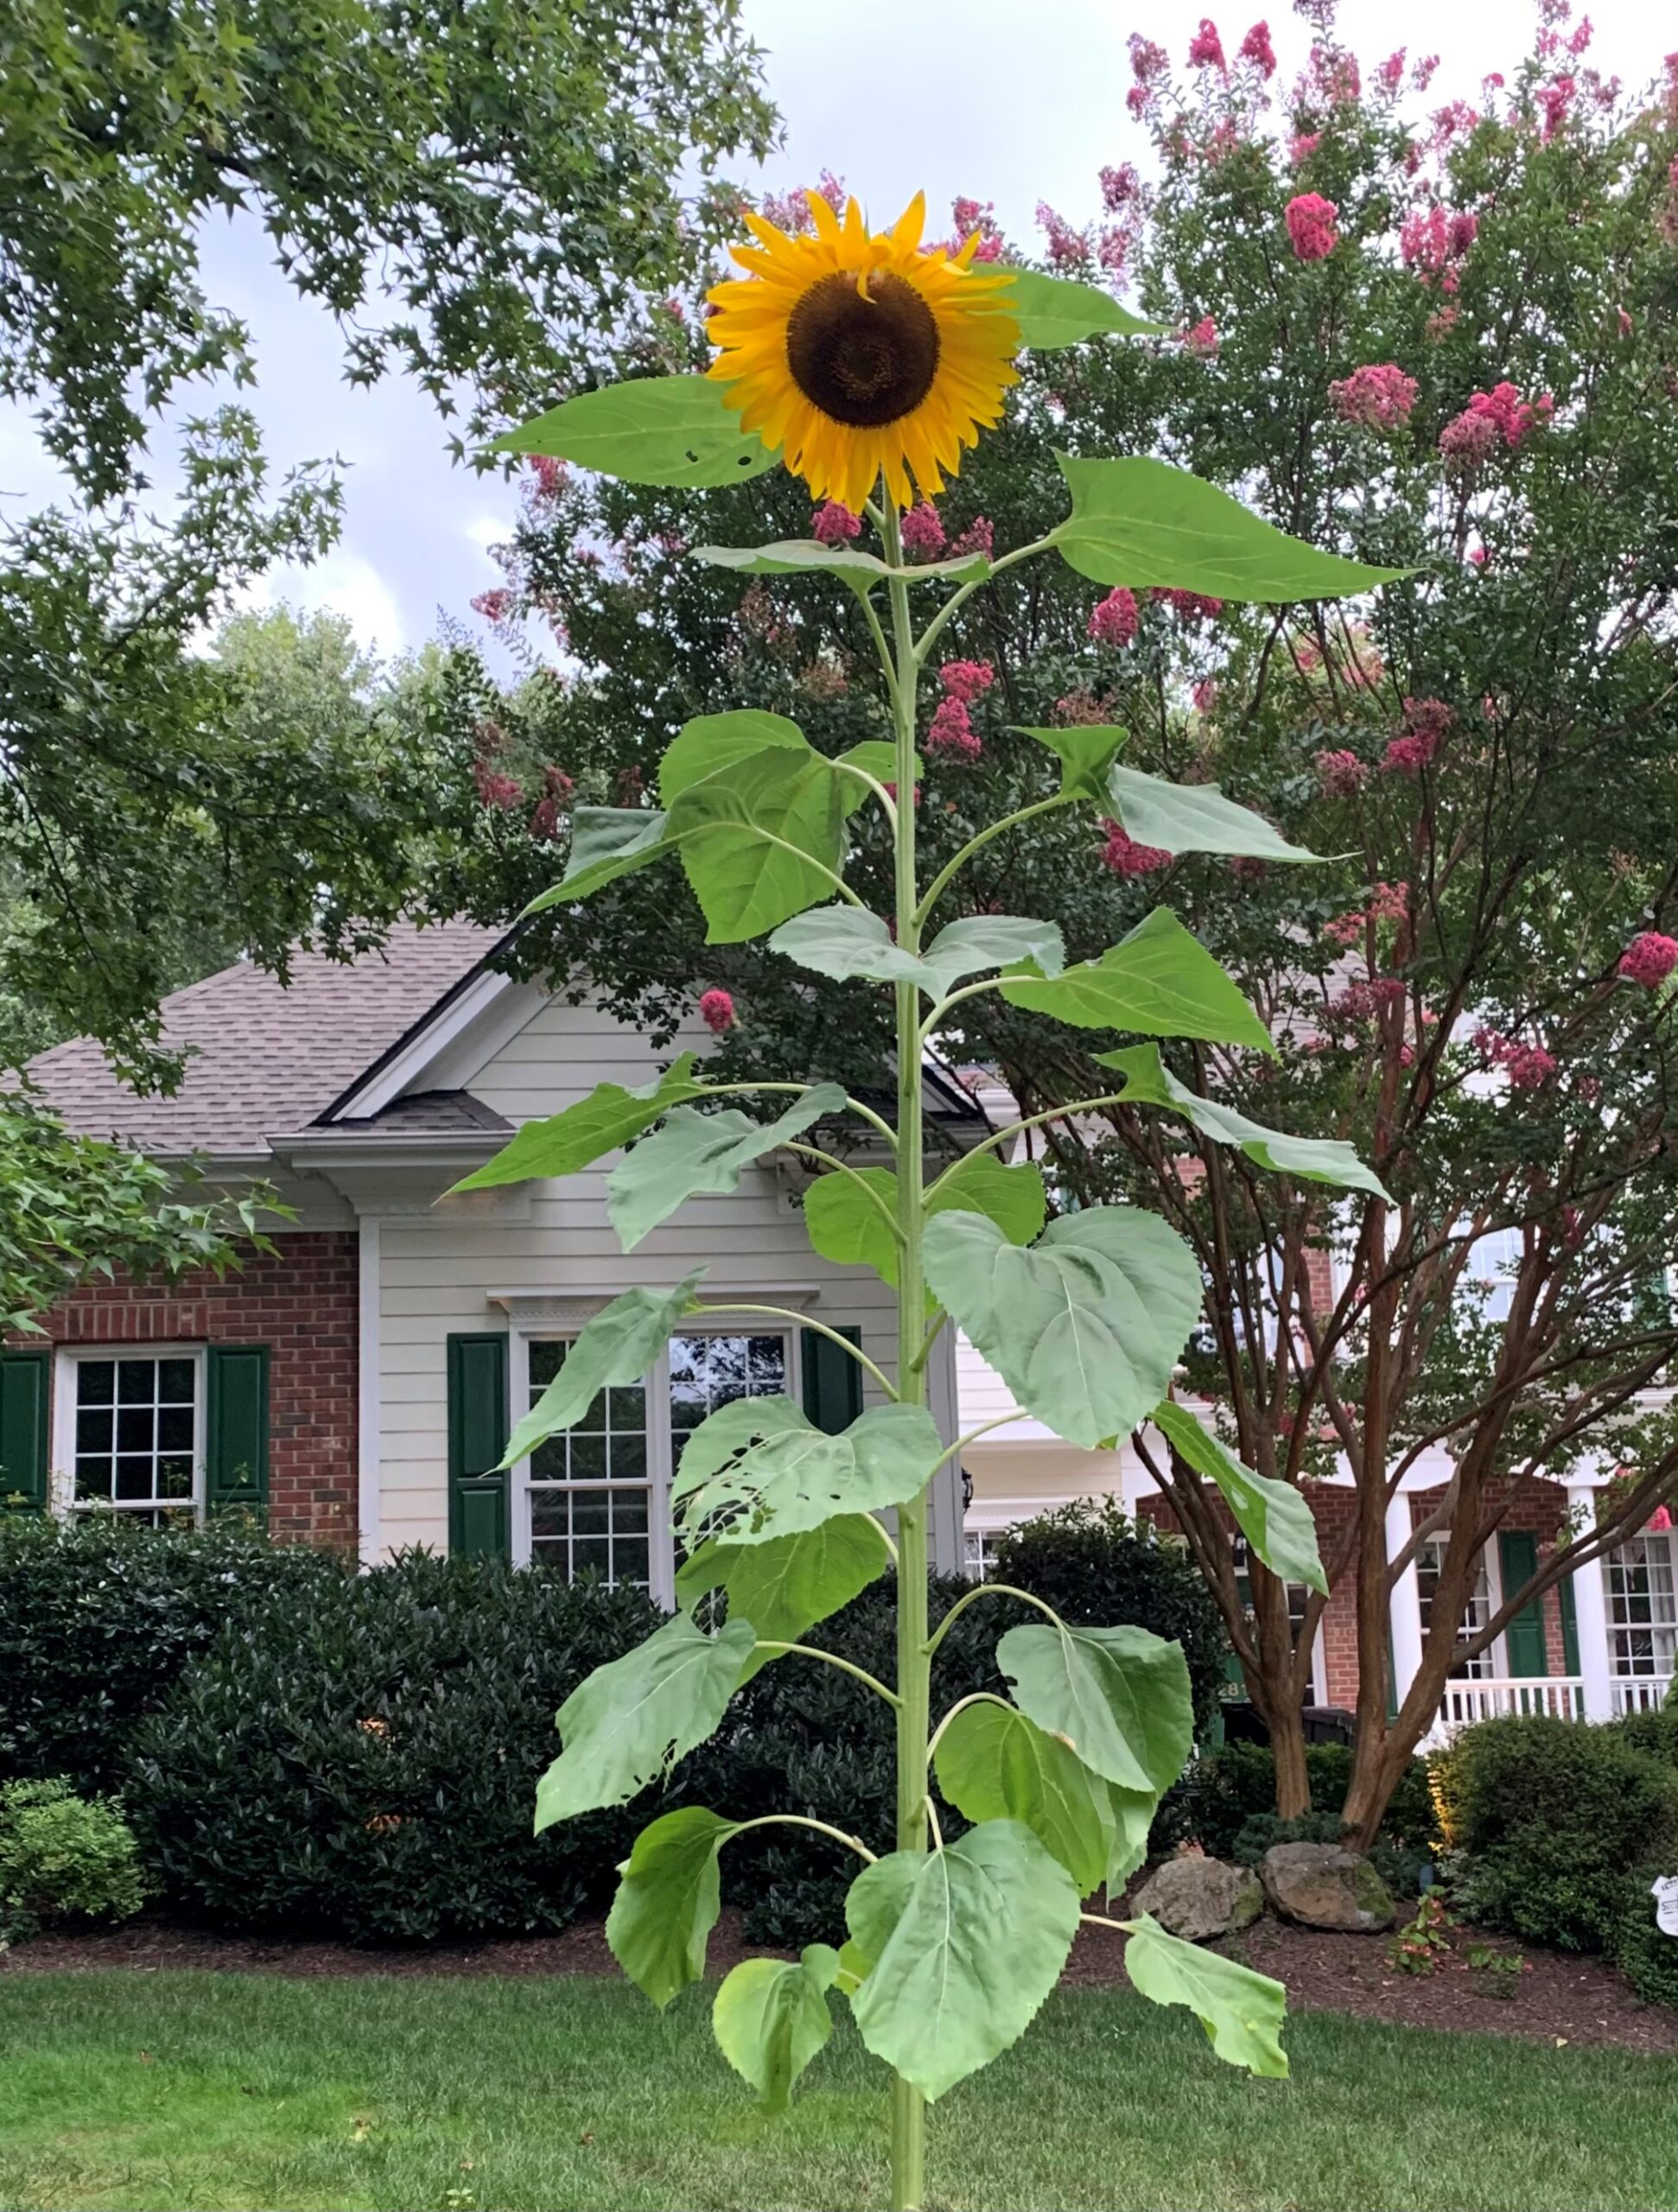 Waiting for the sunflower to show up can be difficult.  But what joy when you see it!  